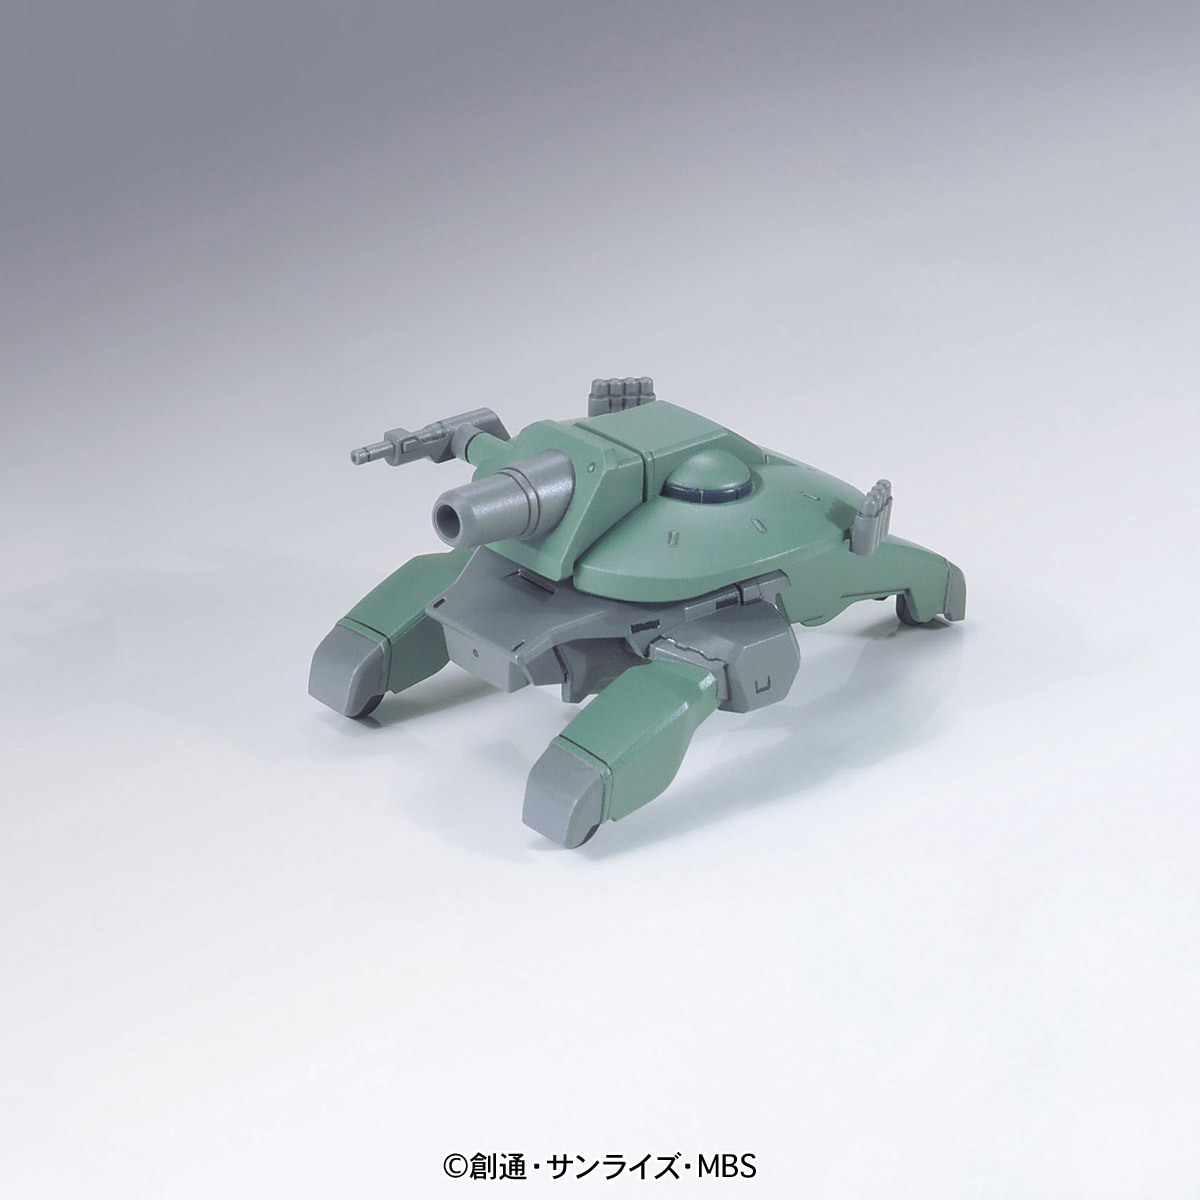 HG 1/144 MS OPTION SET 8 SAU MOBILE WORKER - Release Info, Box art and Official Images